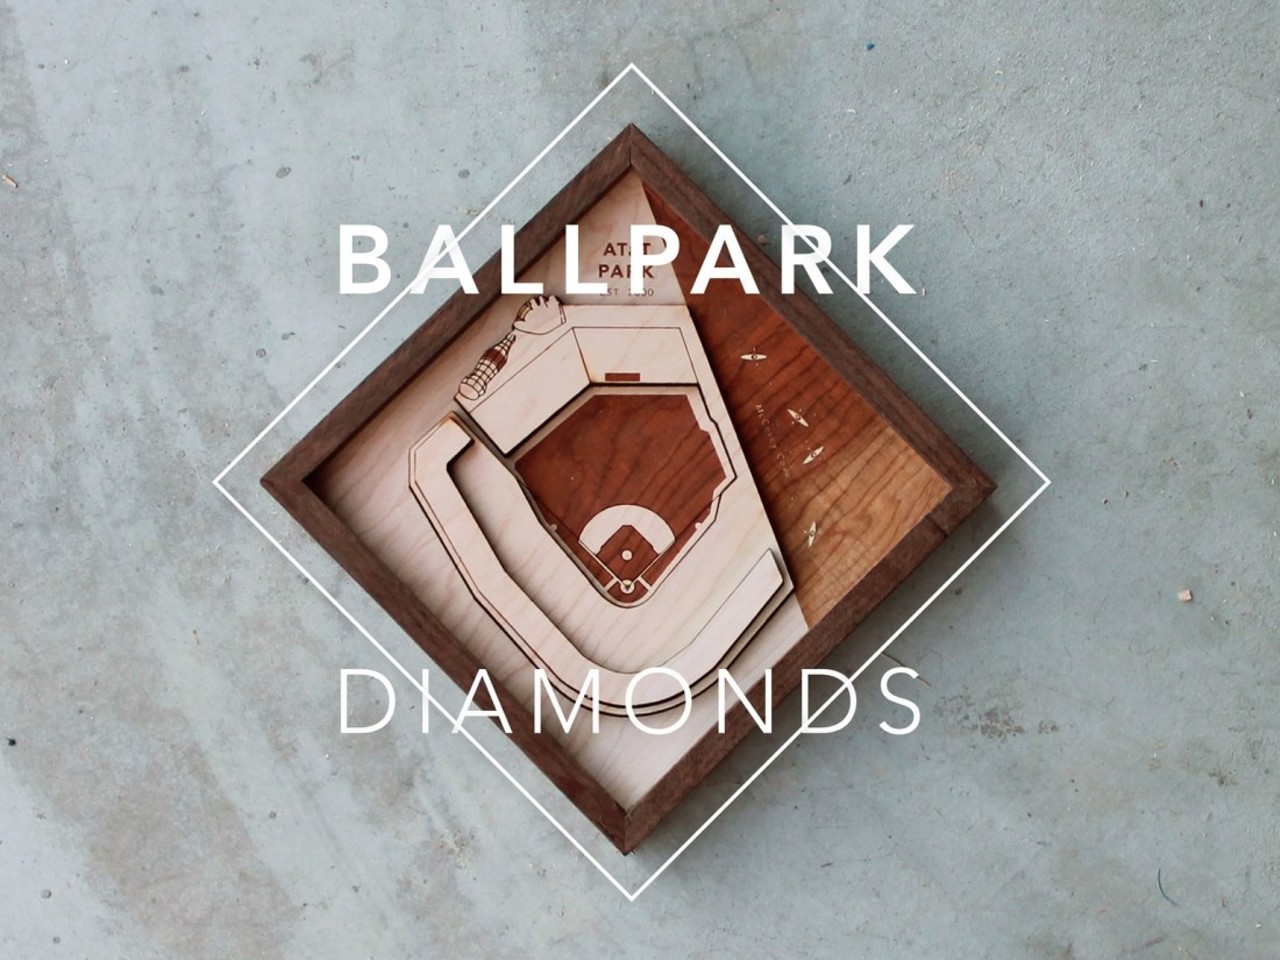 No. 2: We in St. Louis take our baseball seriously -- and now you can commemorate your favorite stadium (did someone say Busch?) on your wall with Ballpark Diamonds by Stadium Graph.
Photo courtesy of Kickstarter / Stadium Graph.